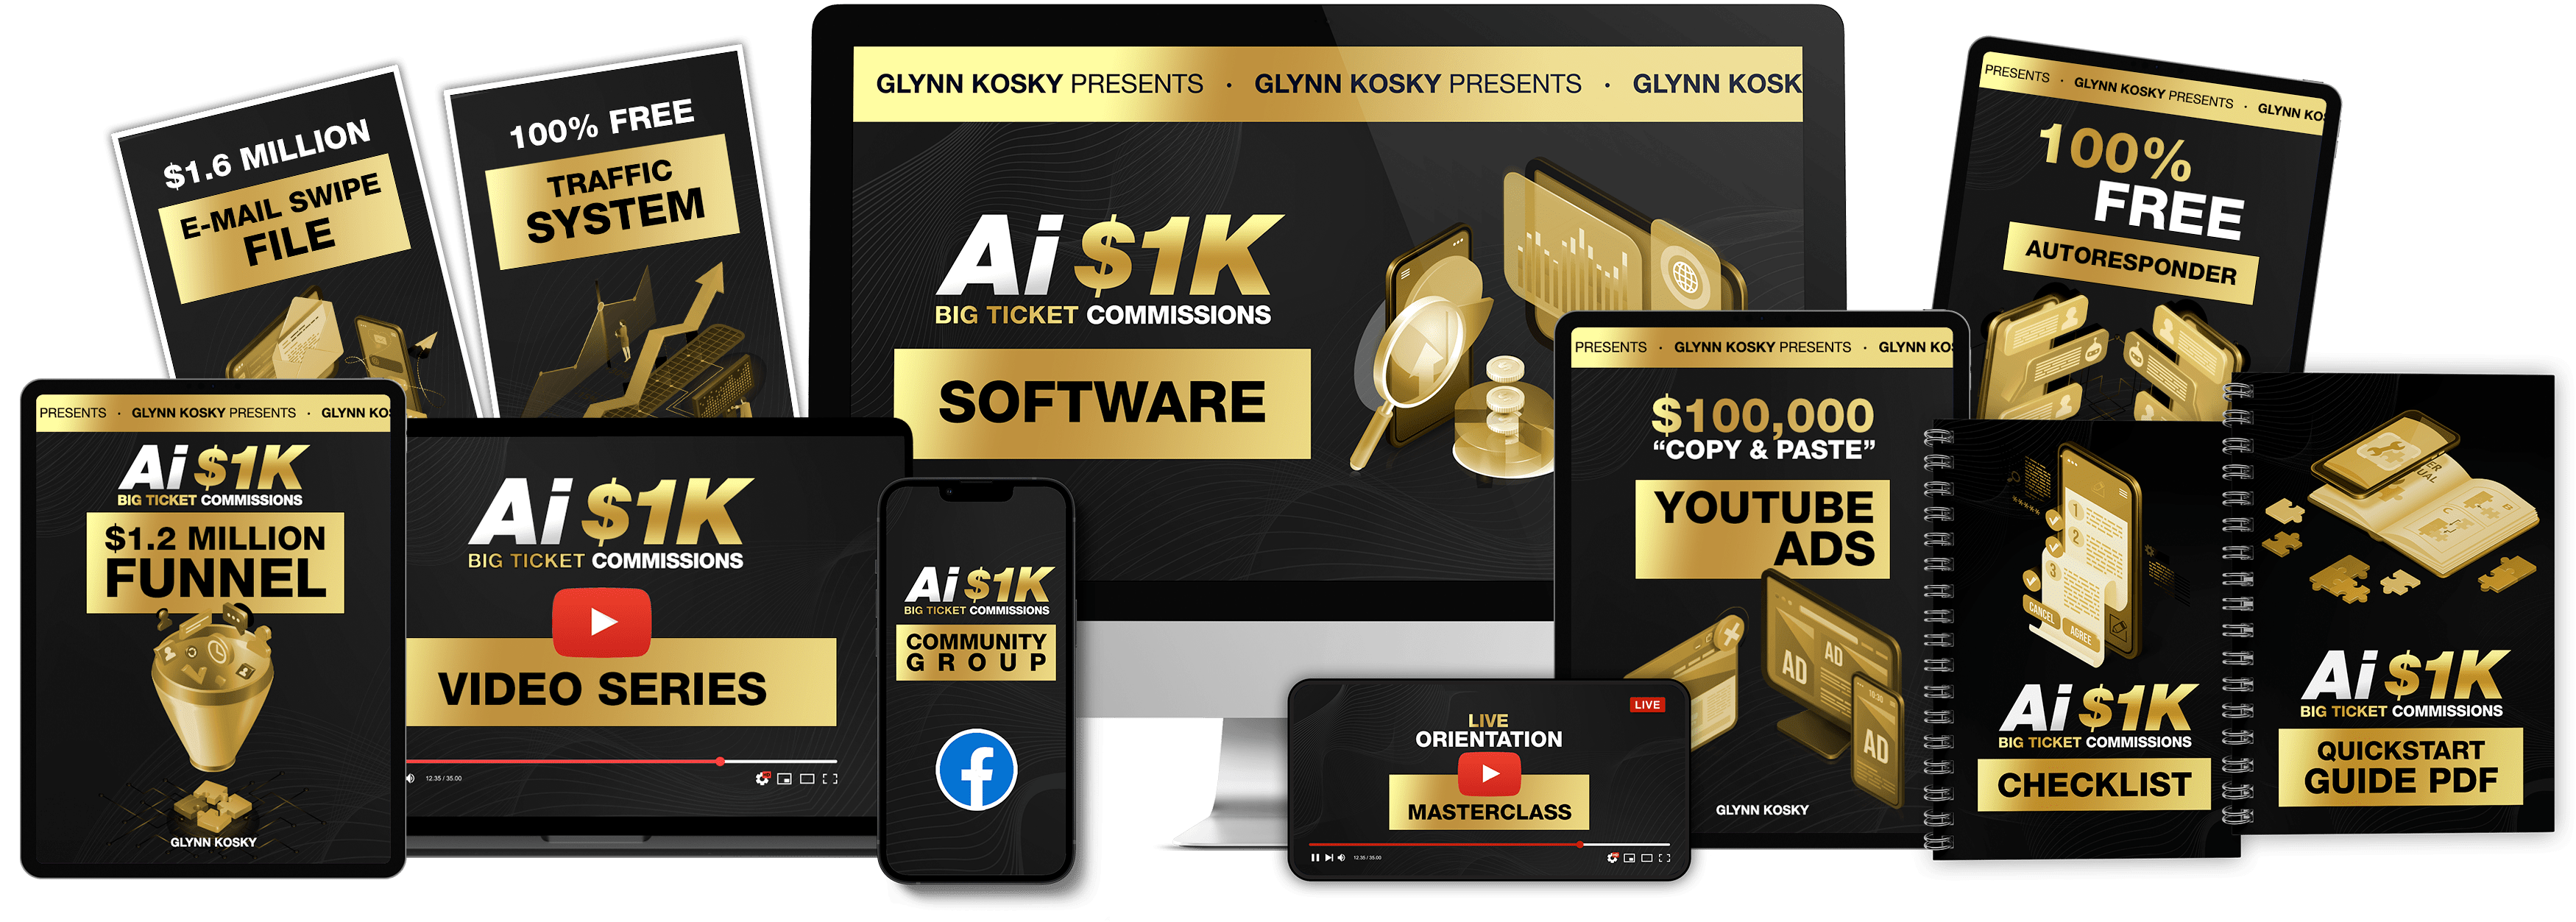 AI 1K Big Ticket Commissions Review